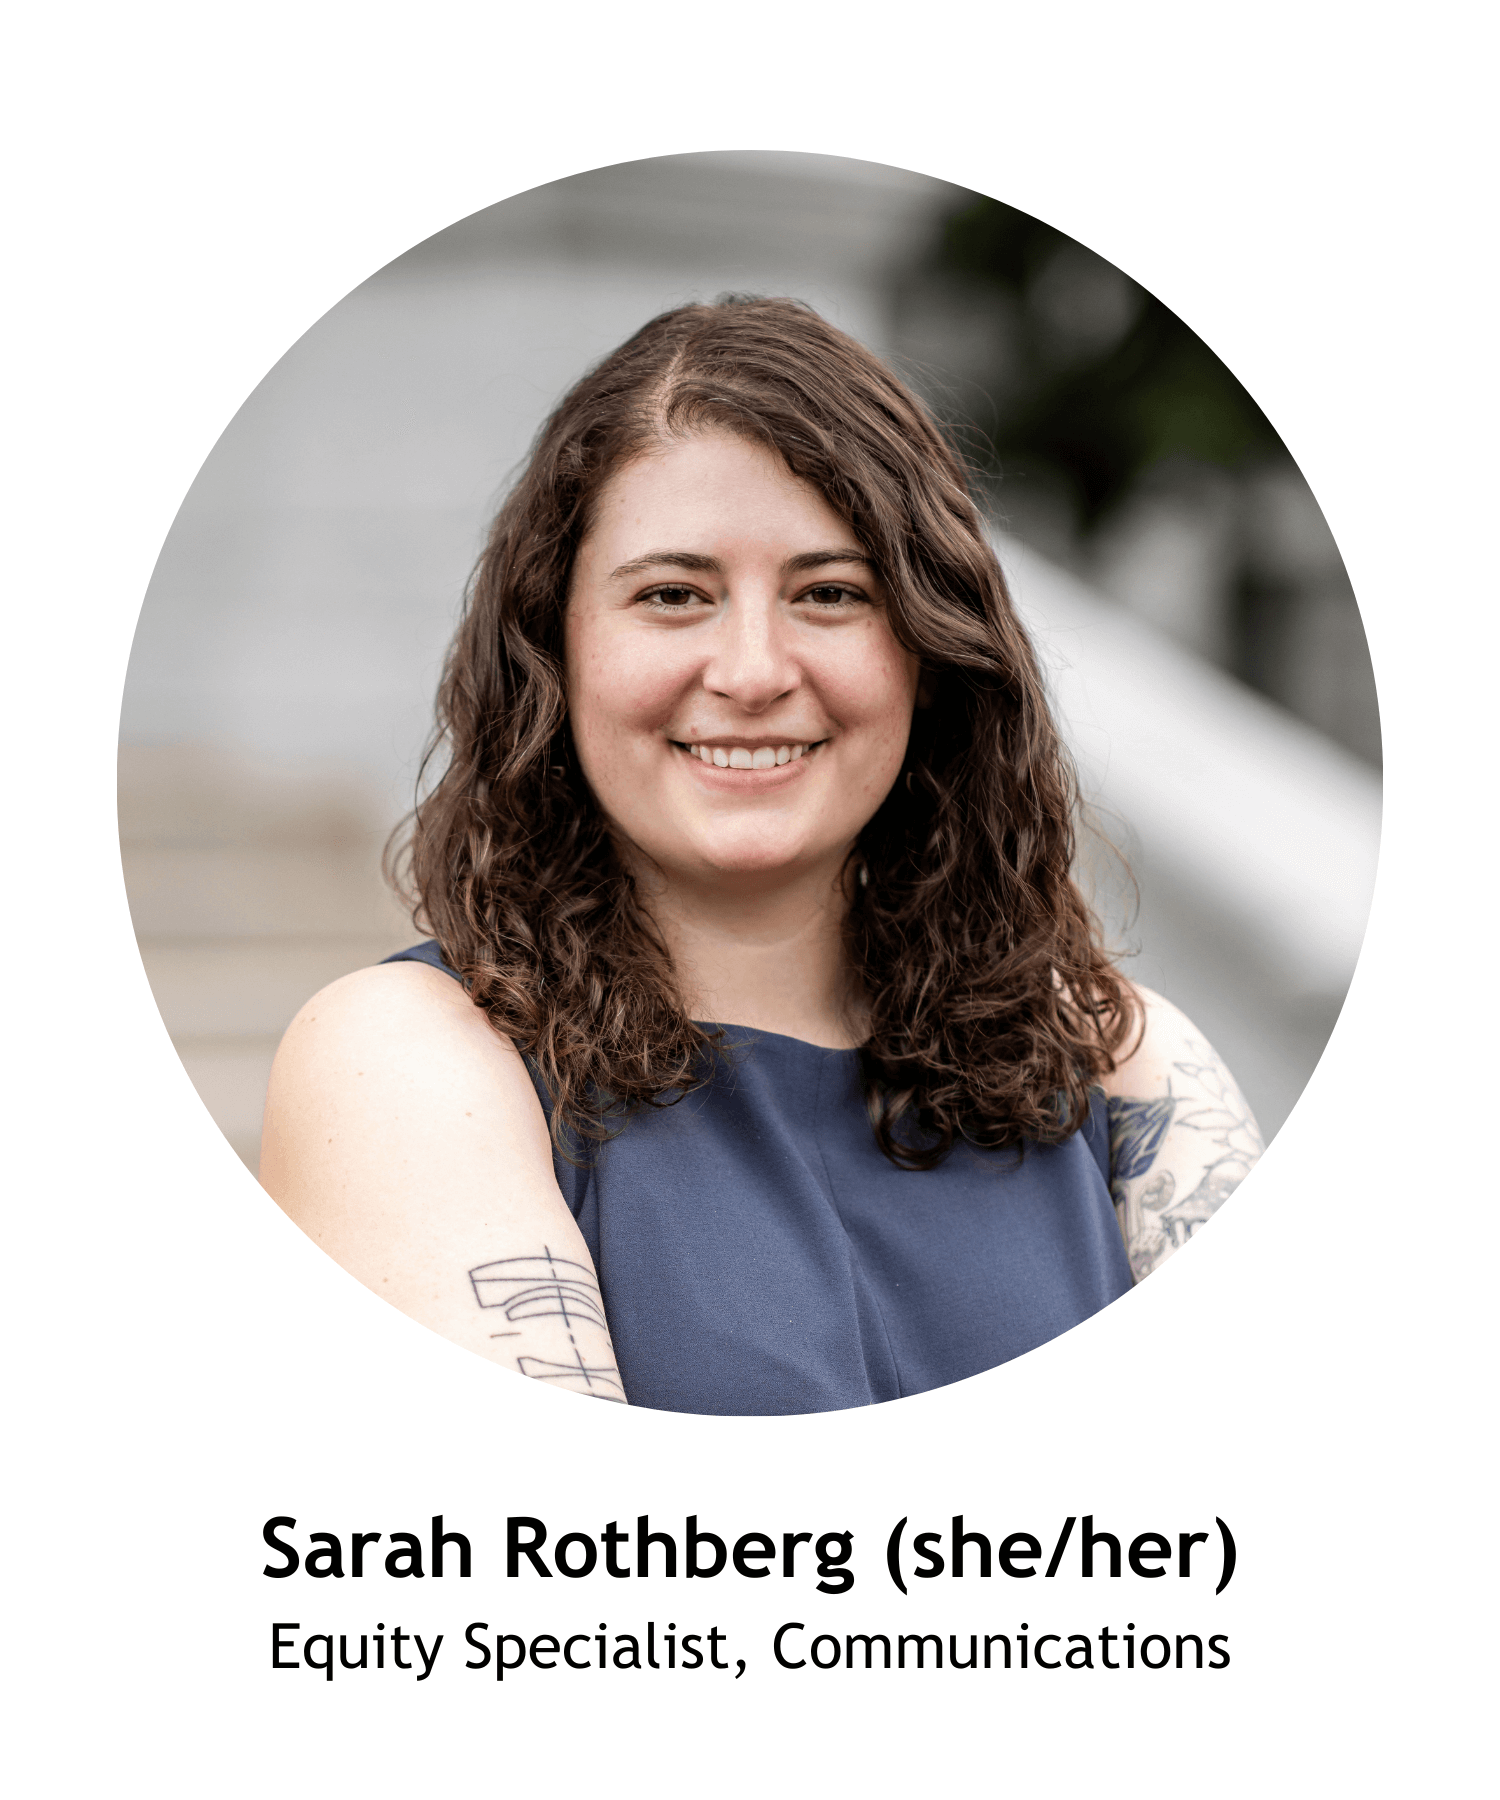 Sarah Rothberg (she/her), Equity Specialist, Communications